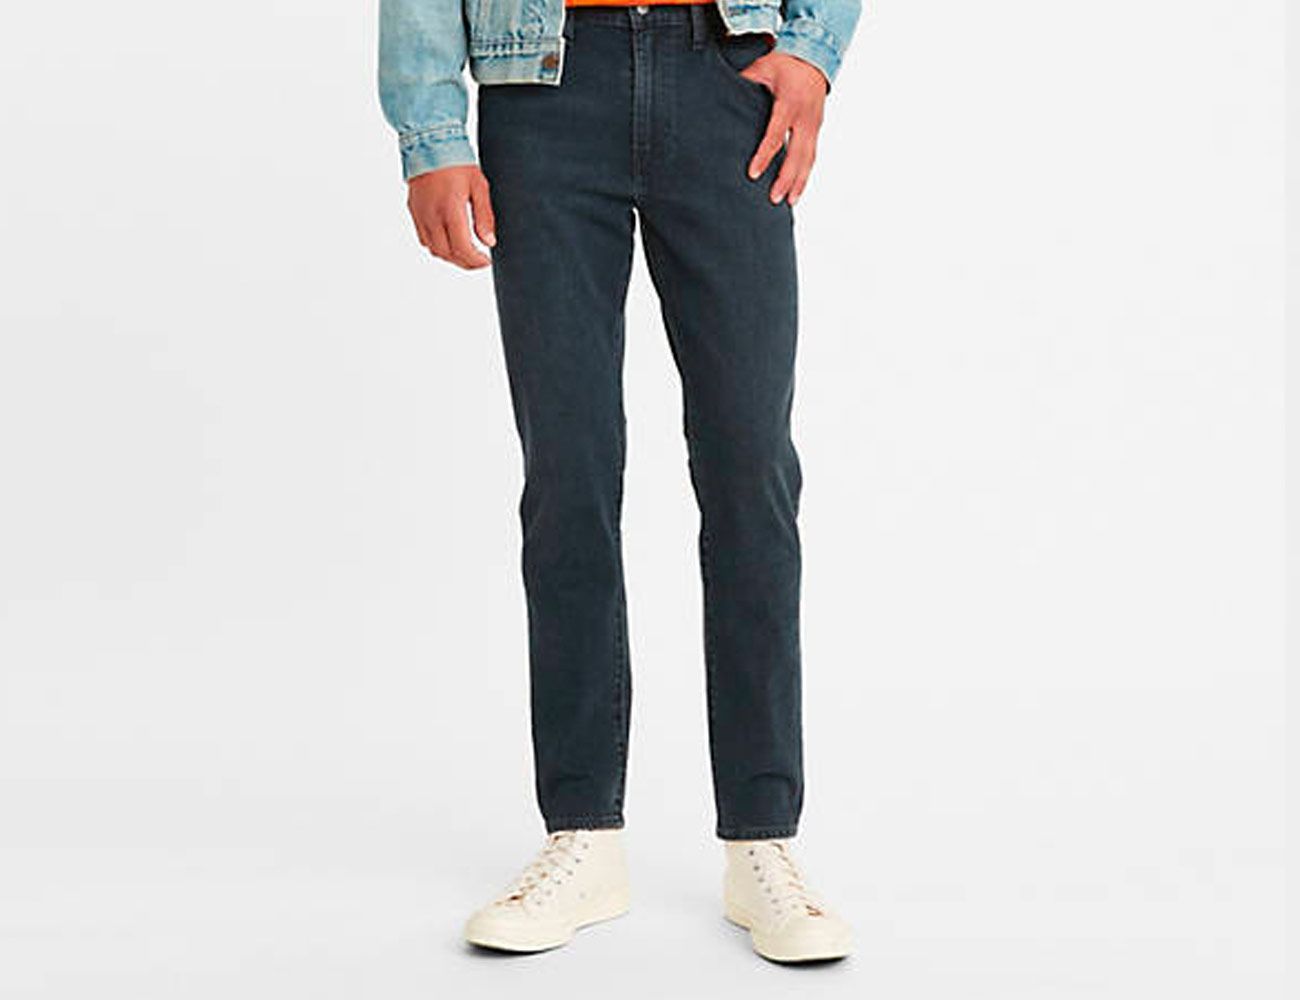 soort Electrificeren kom The Complete Buying Guide to Levi's Jeans: All Fits, Explained